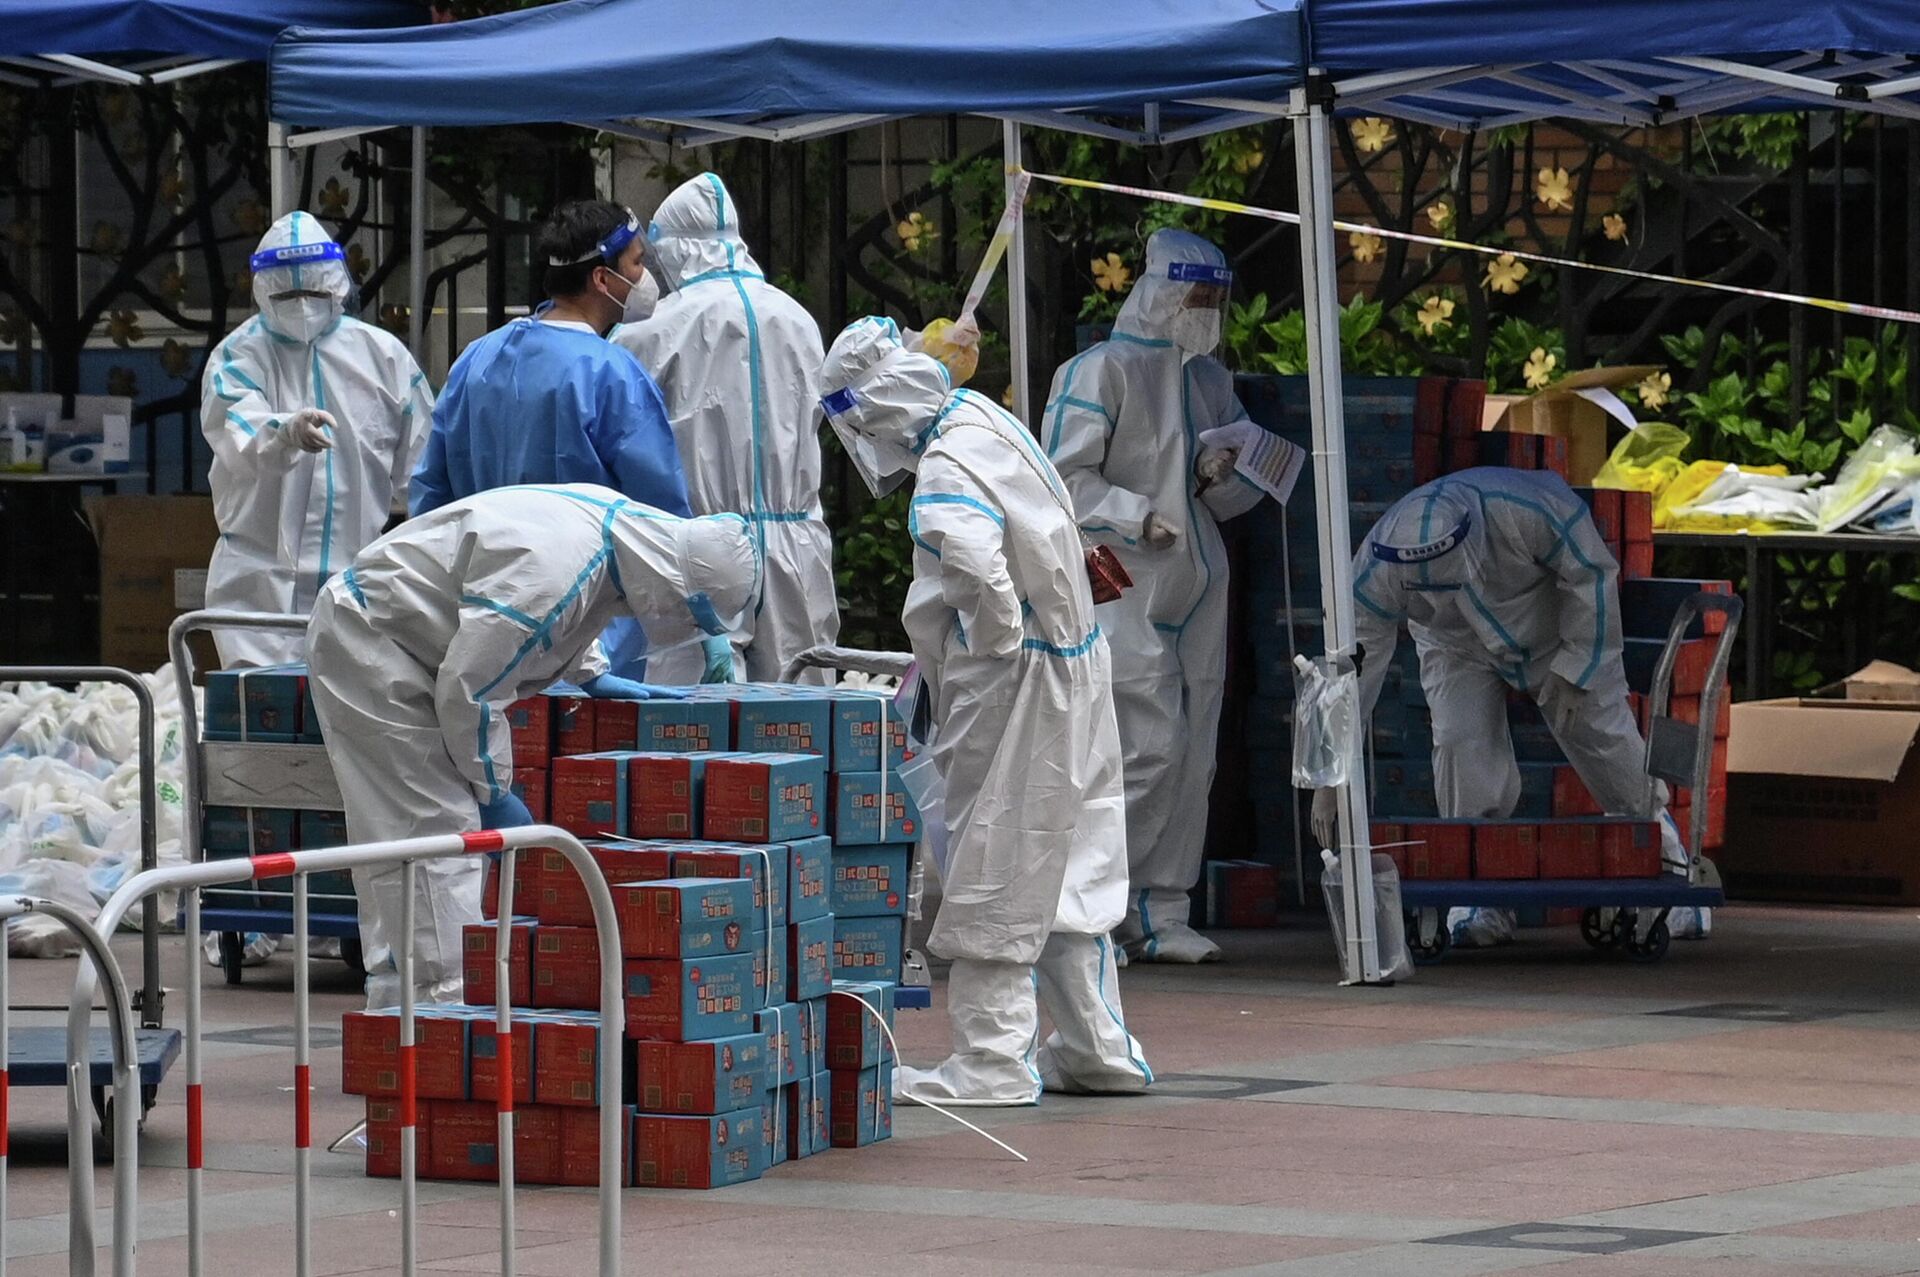 Workers wearing personal protective equipment (PPE) are seen next to food delivered by the local government for residents in a compound during a Covid-19 lockdown in the Jing'an district in Shanghai on April 10, 2022.  - Sputnik International, 1920, 11.05.2022